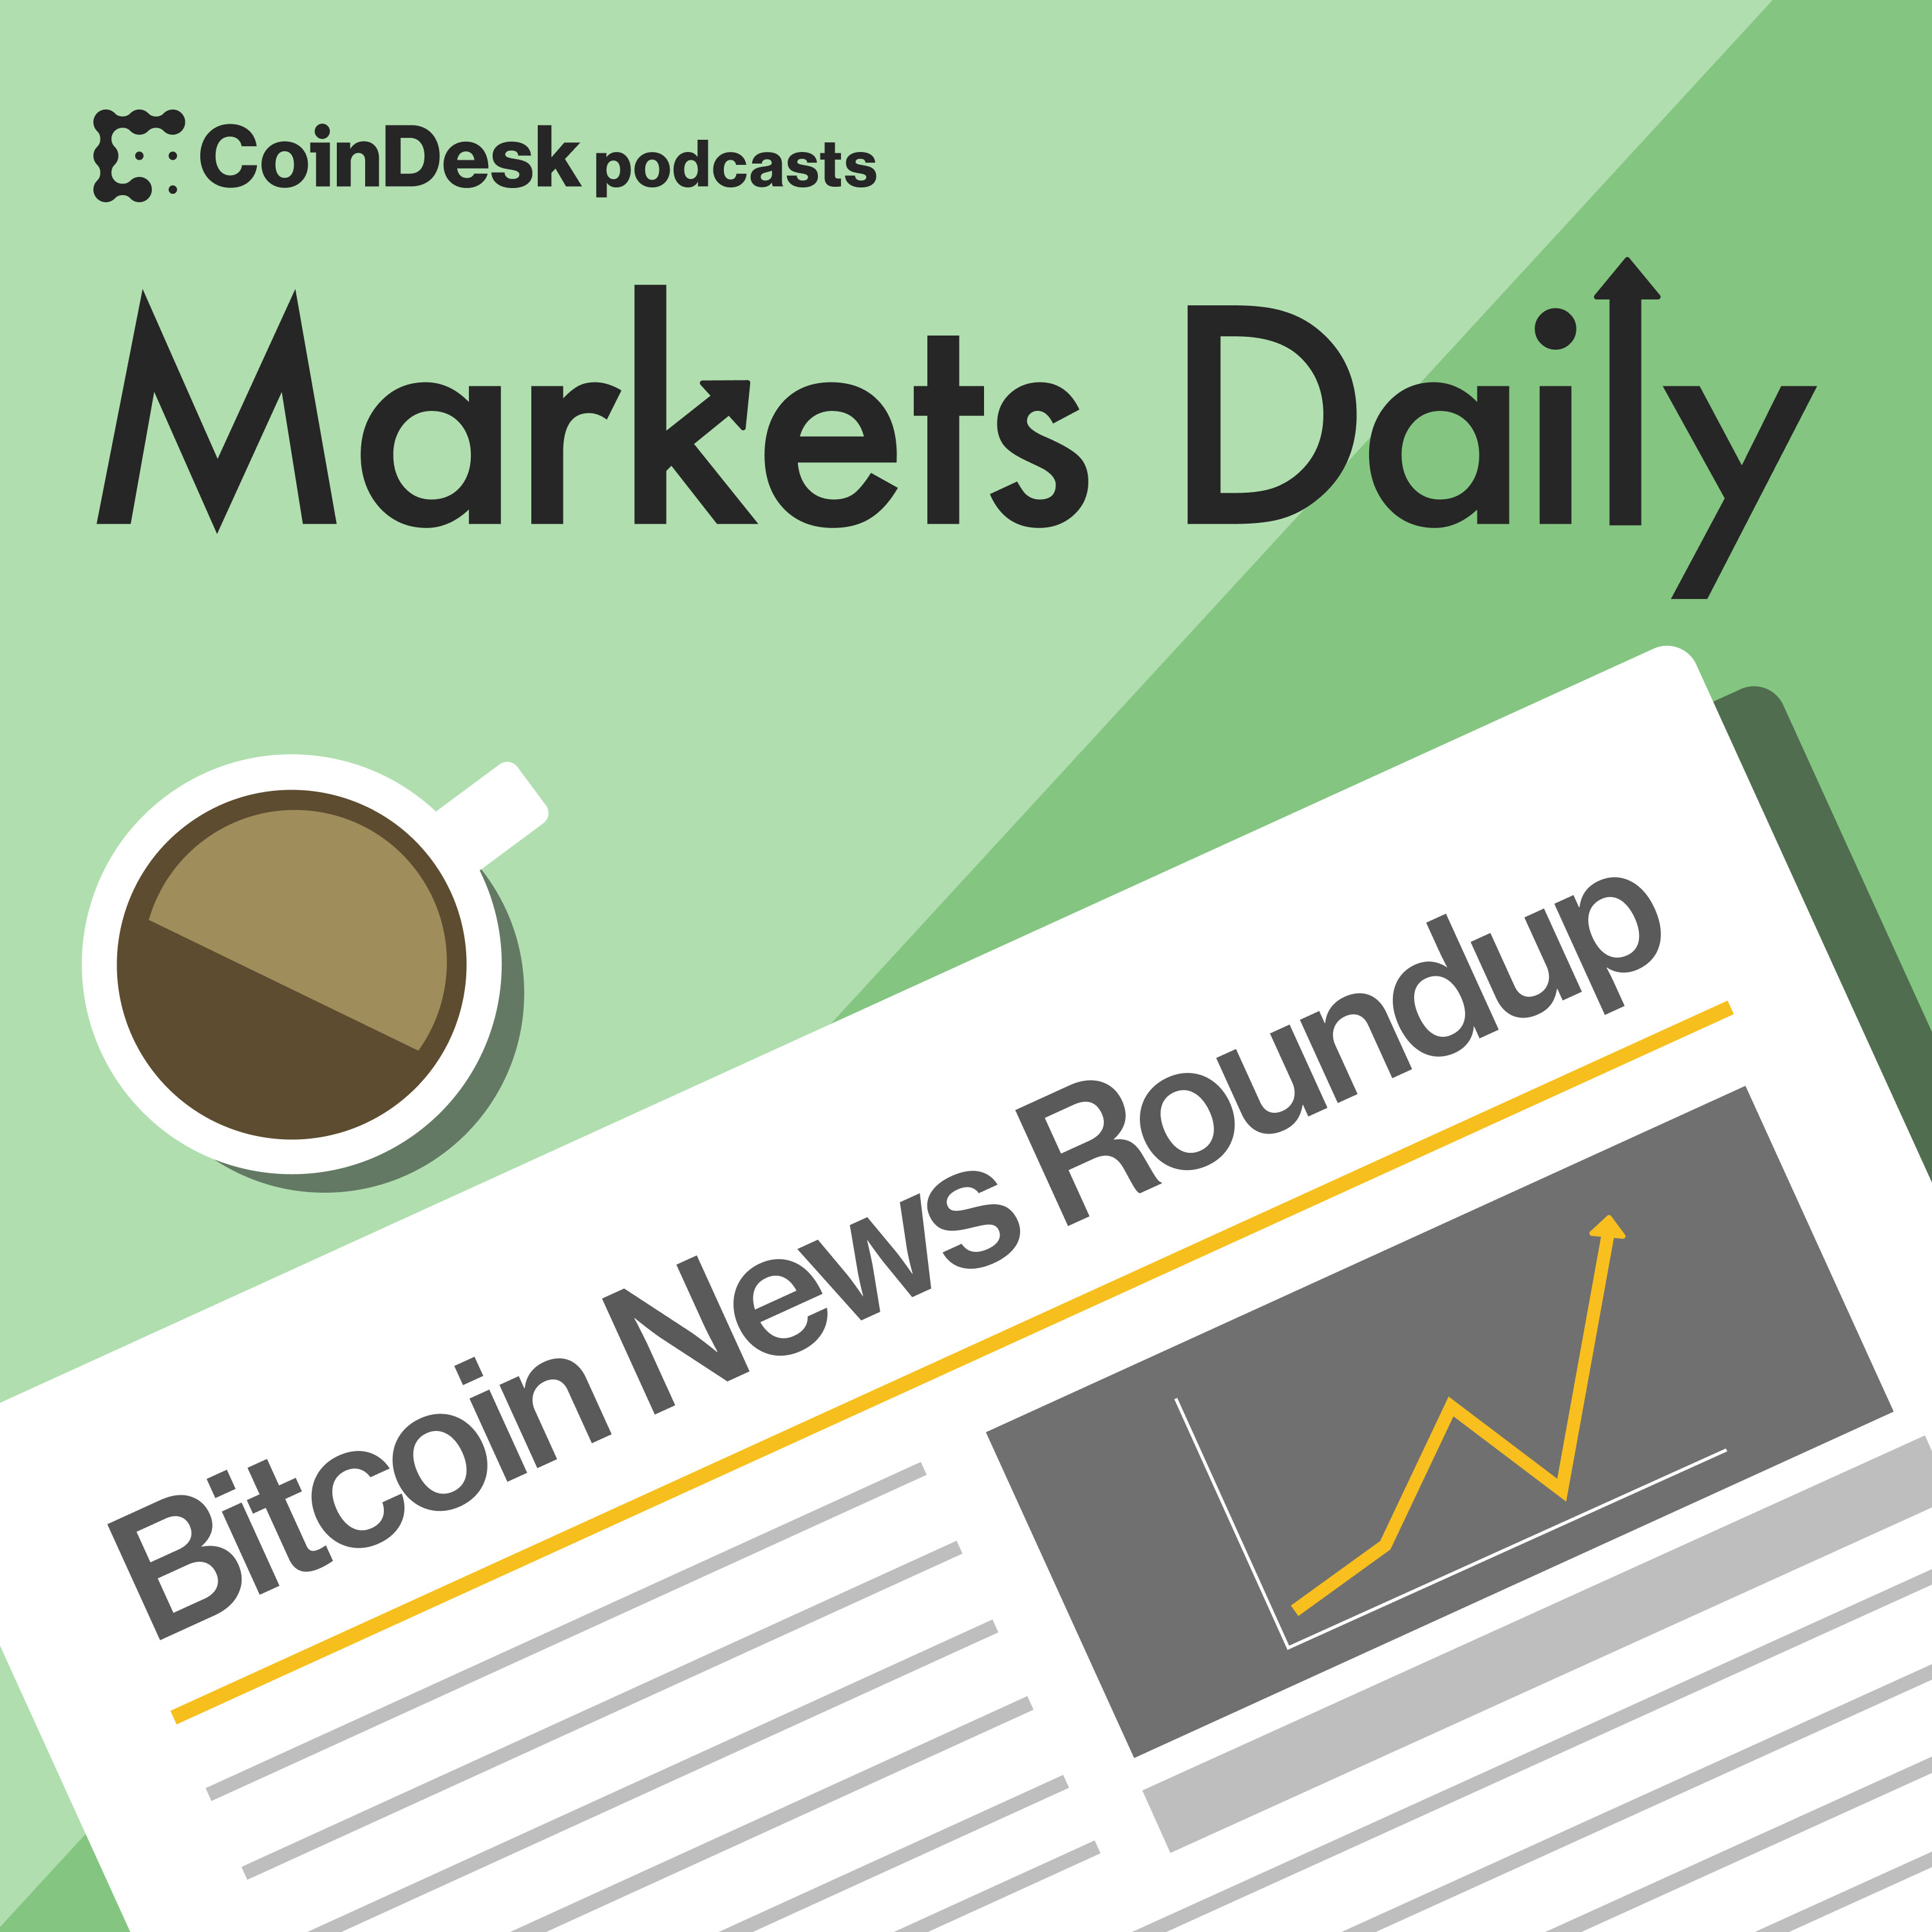 MARKETS DAILY: Crypto Update | Bitcoin’s Narrative ’Never Better’: ZX Squared Capital Co-Founder